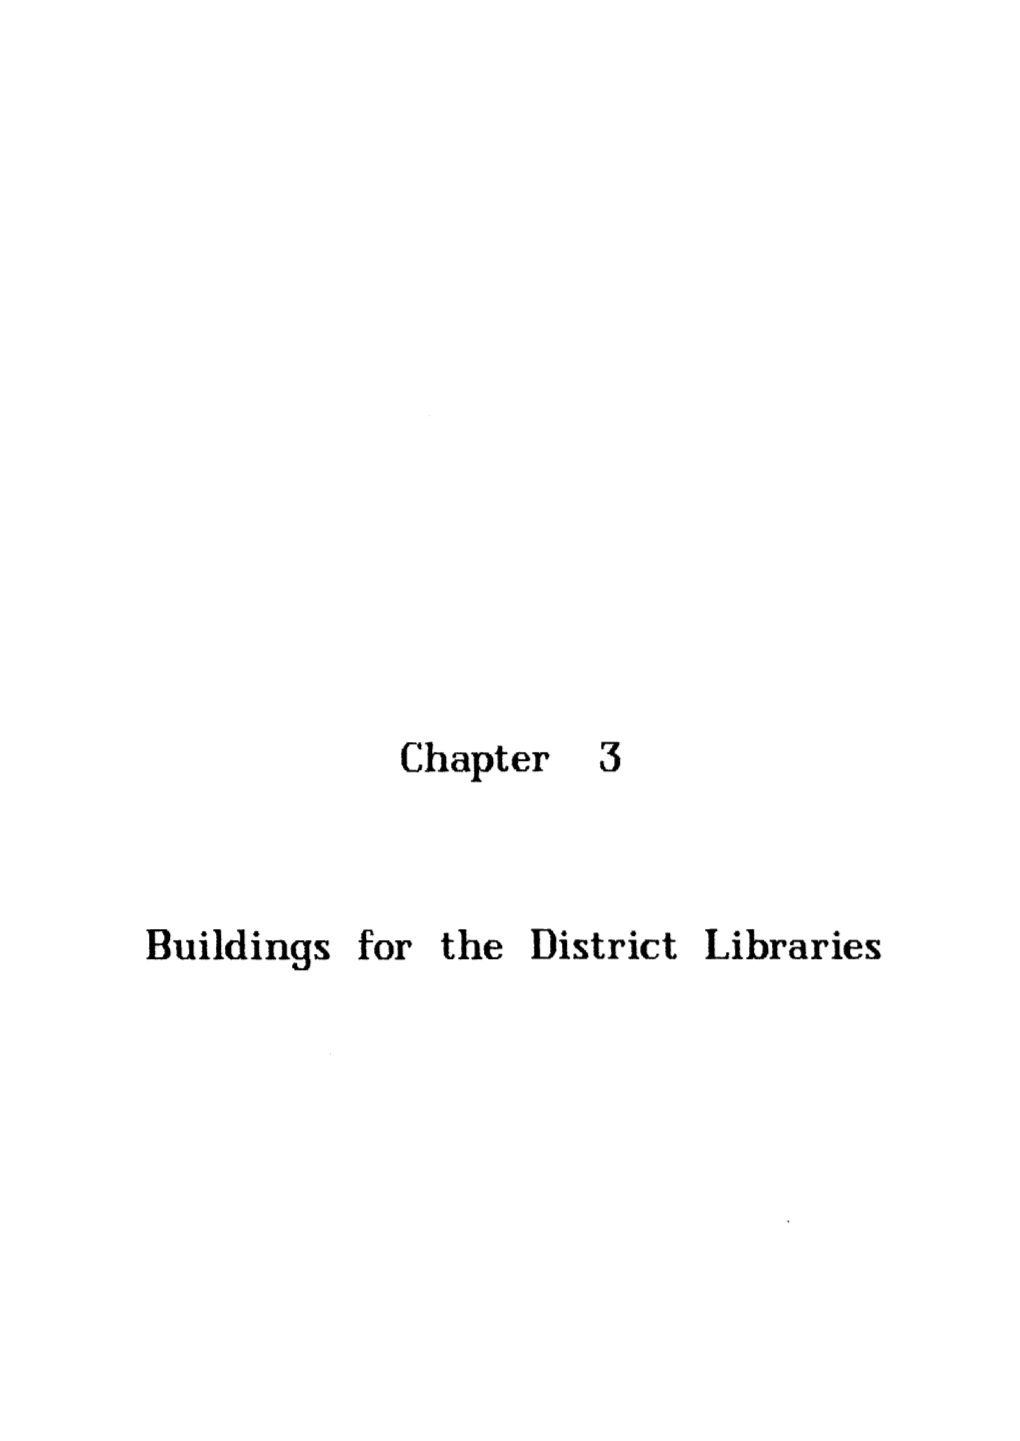 Chapter 3 Buildings for the District Libraries